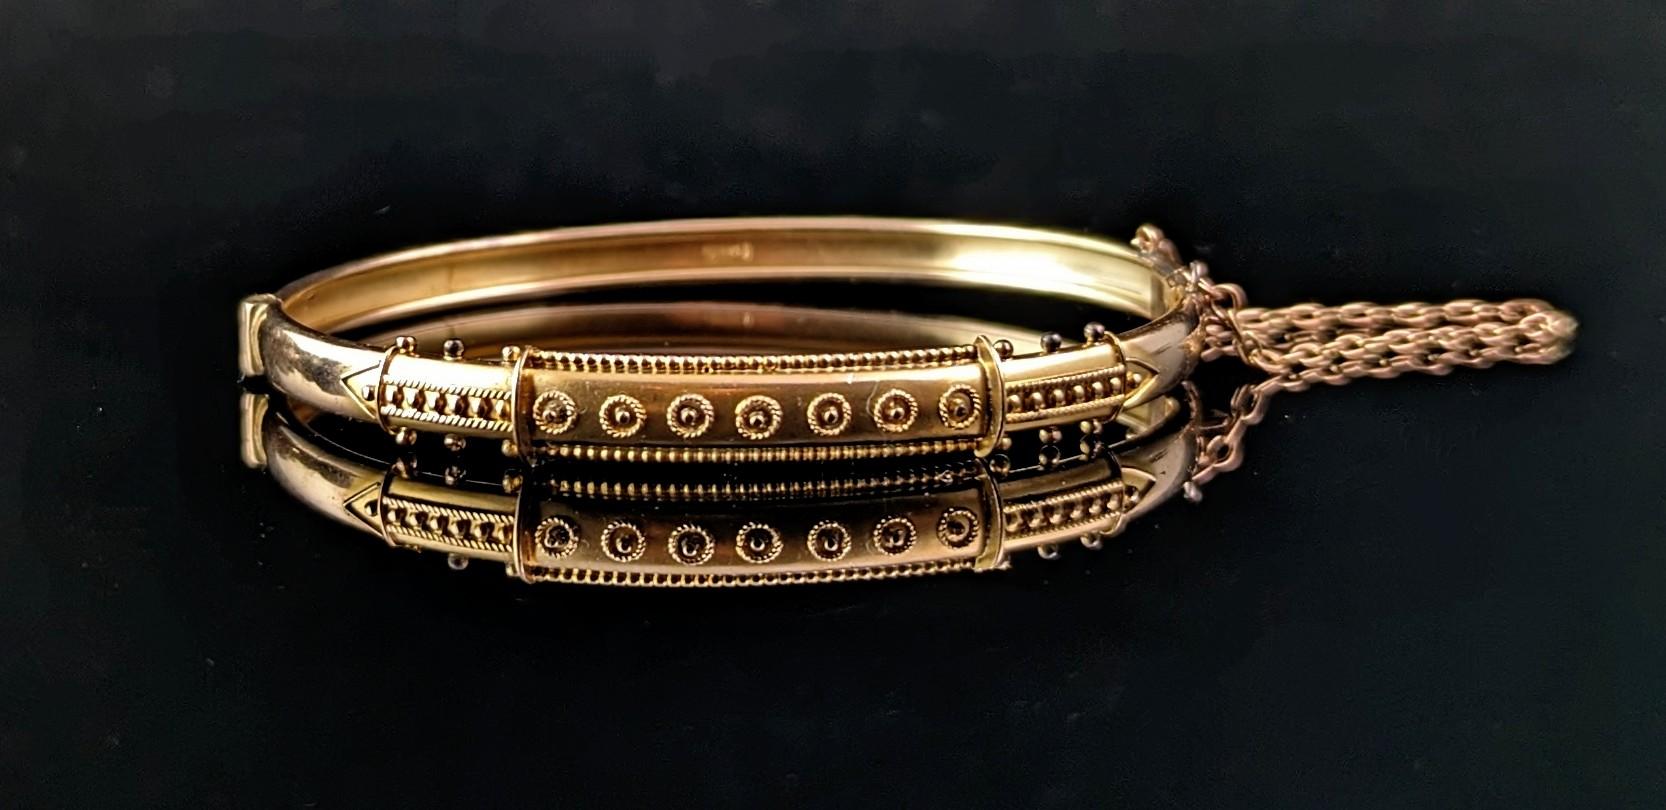 The most beautiful antique Victorian 9ct gold, Etruscan revival bangle.

It is a lovely rich warm gold which adds to its regal Etruscan manner, the front of the bangle is intricately designed with delicate Cannetille detailing showcasing the fine